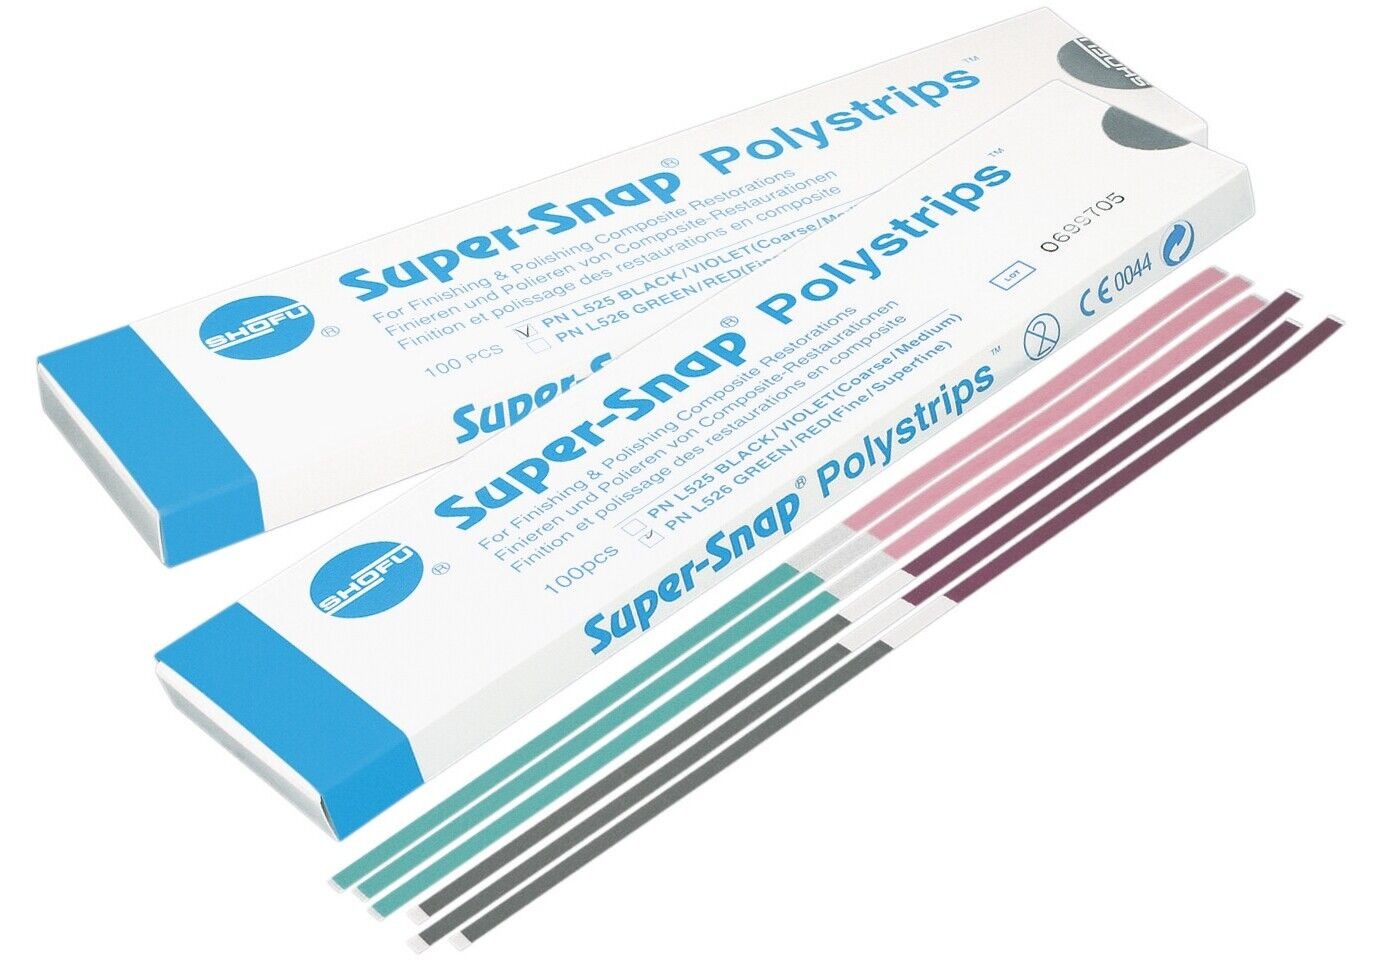 Super-Snap Polystrips 100Bx - Click Image to Close